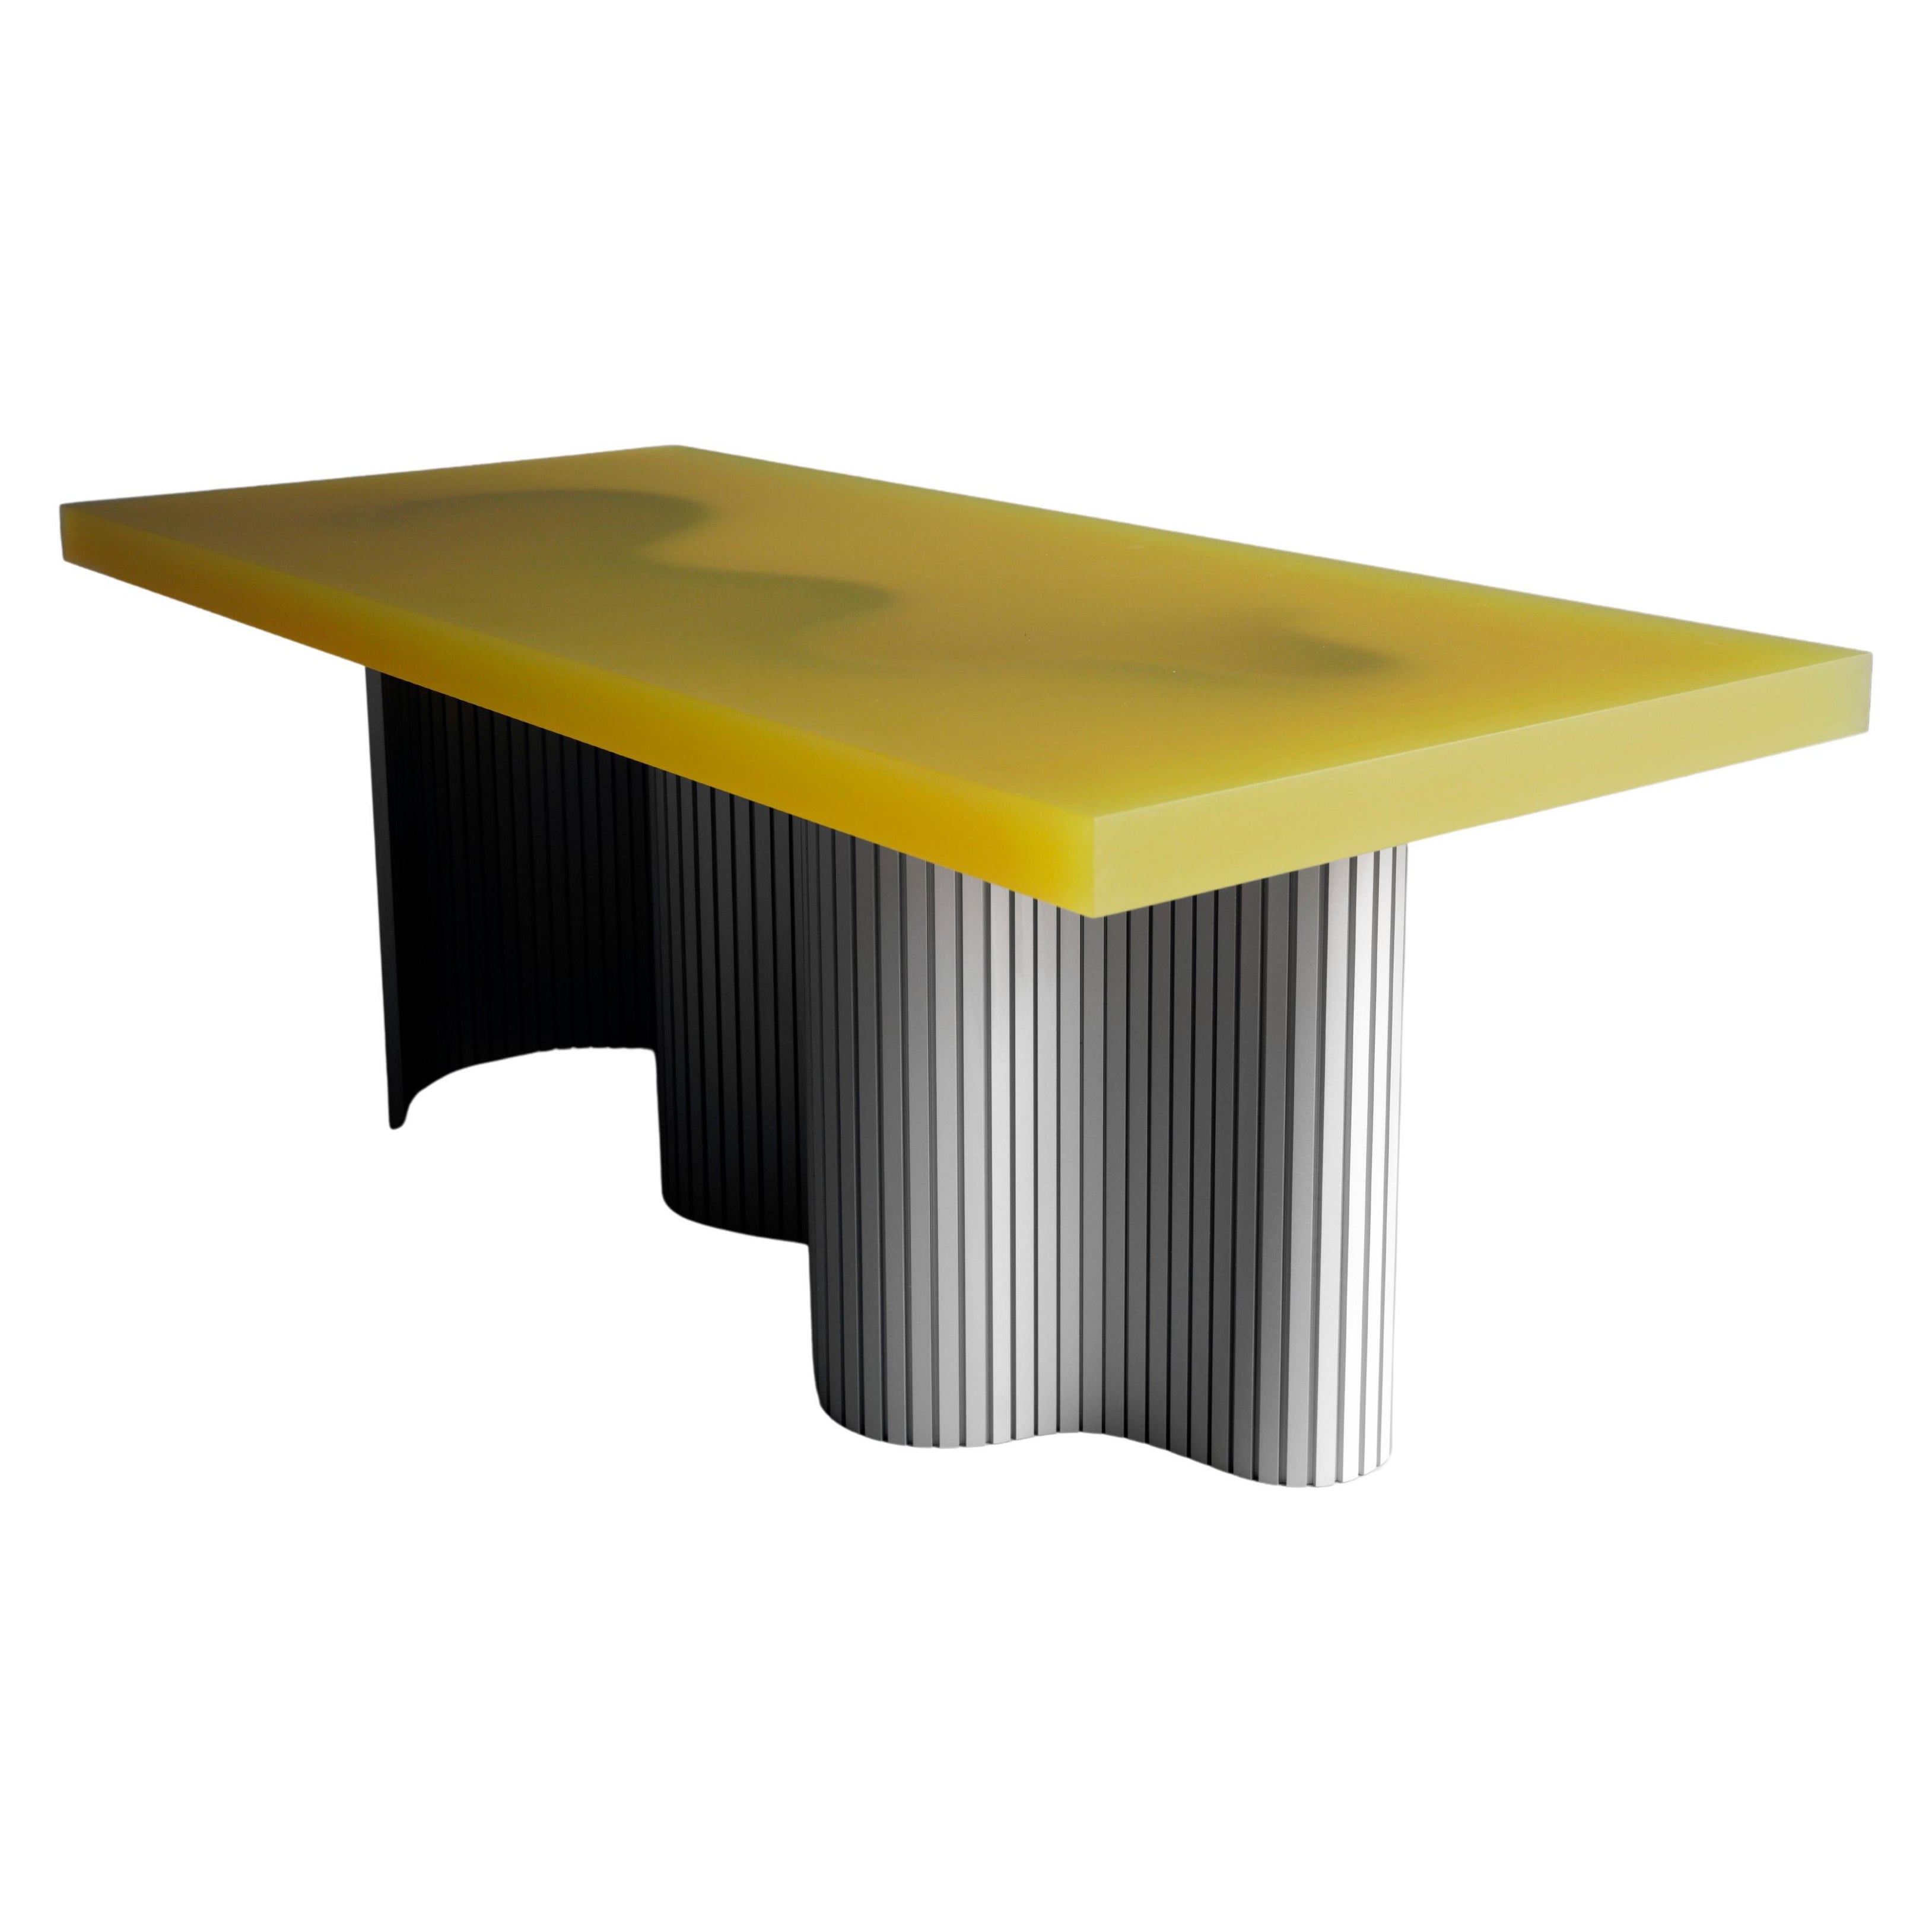 Contemporary Resin Couchtisch, Yellow Spine Table, Erik Olovsson